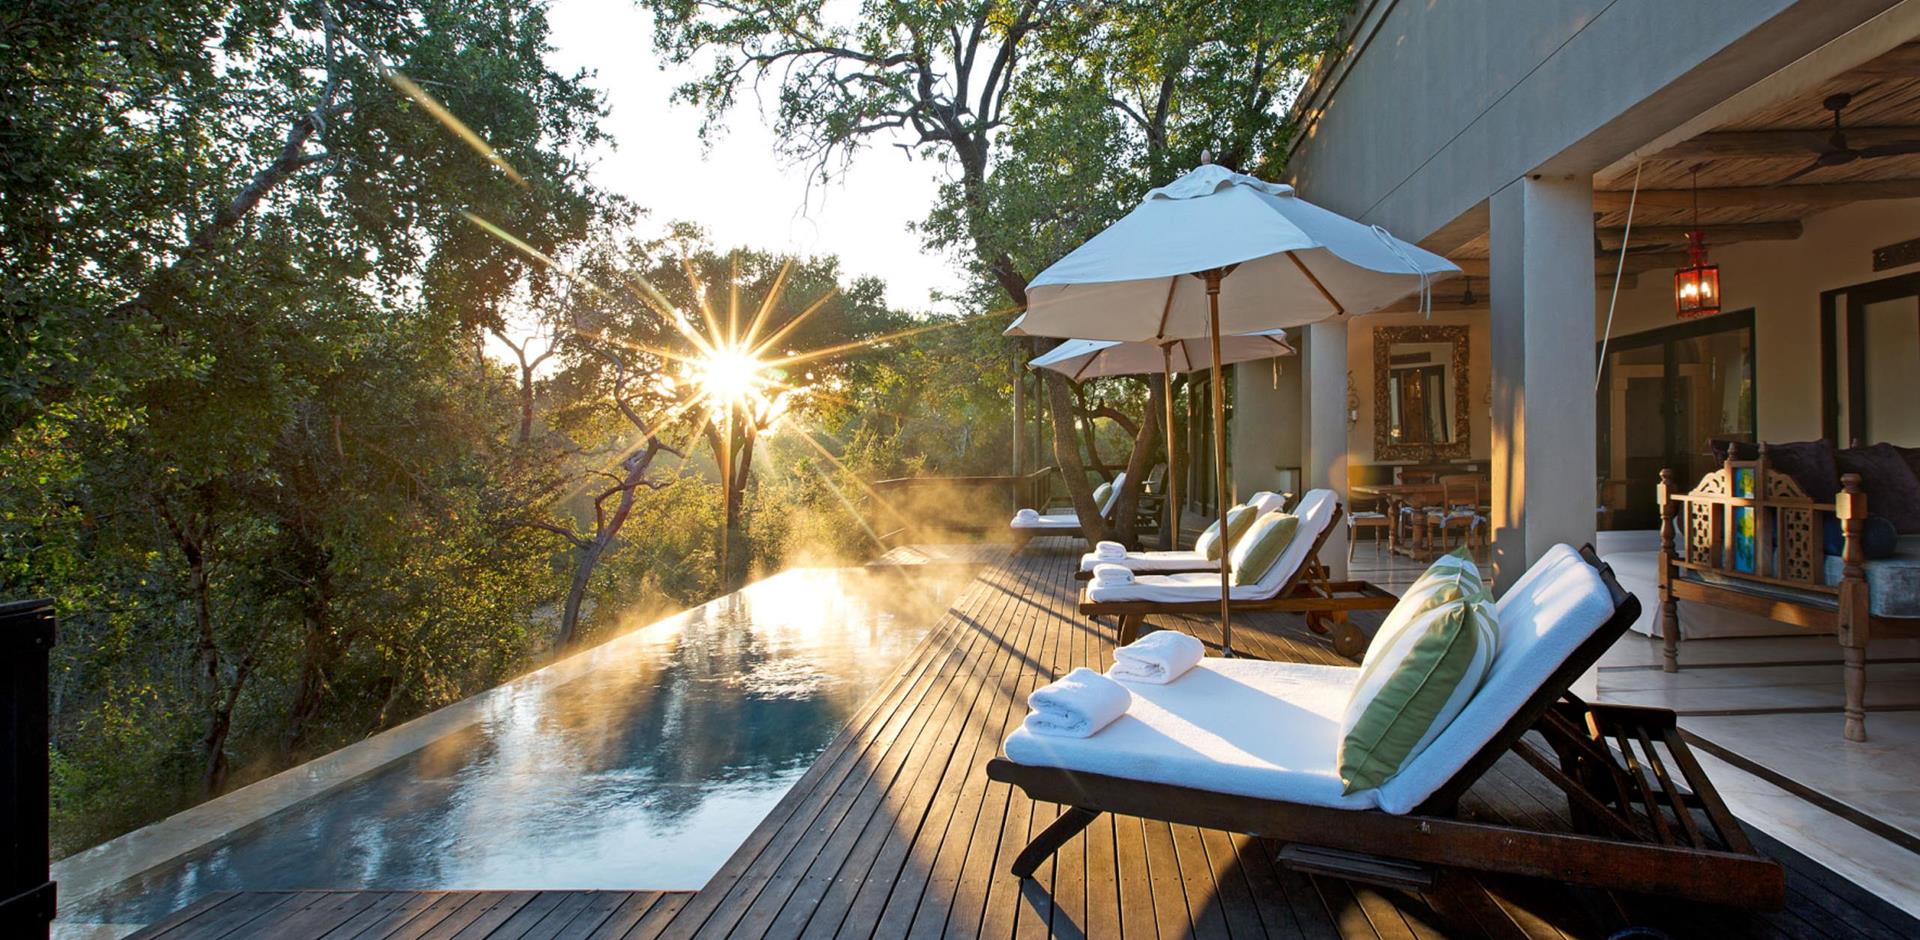 Pool and sun deck, The Lodge at Royal Malewane, South Africa, A&K